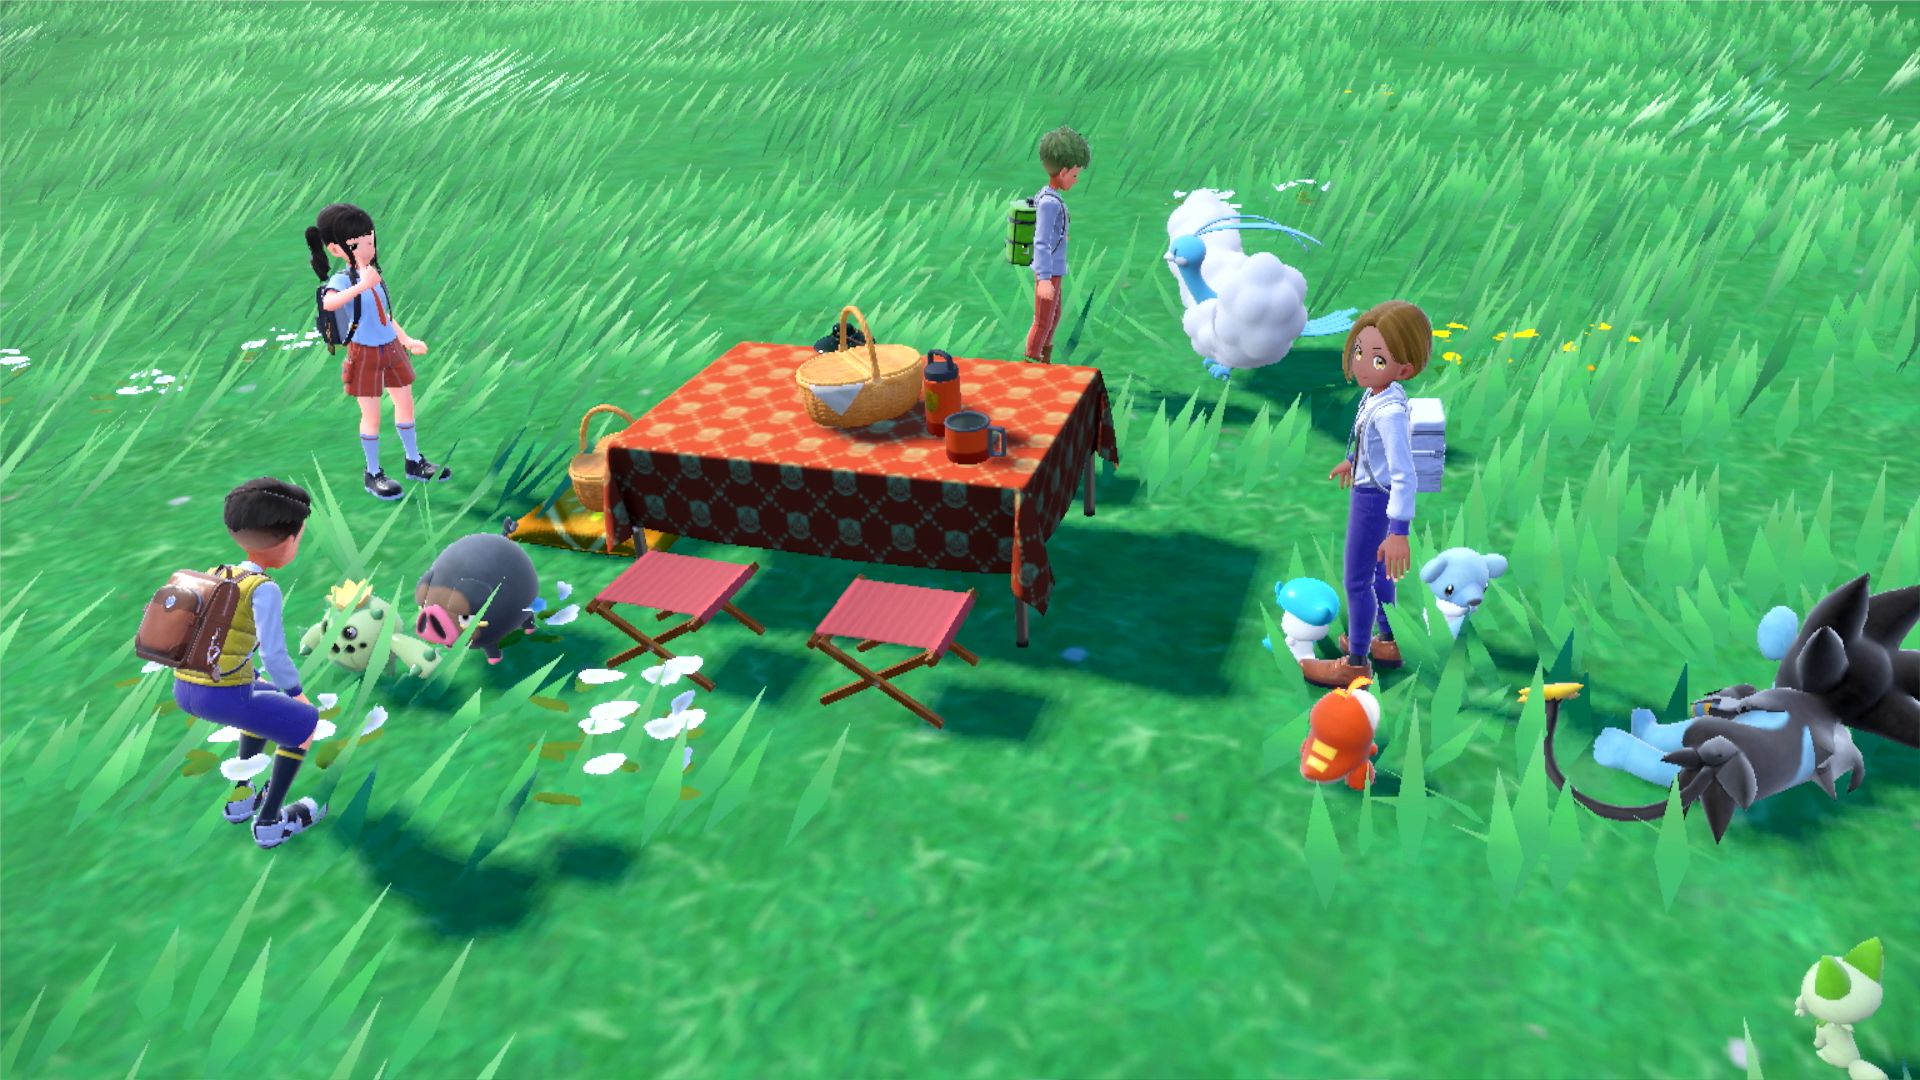 Four Pokémon trainers hanging out around a picnic table with their Pokémon.